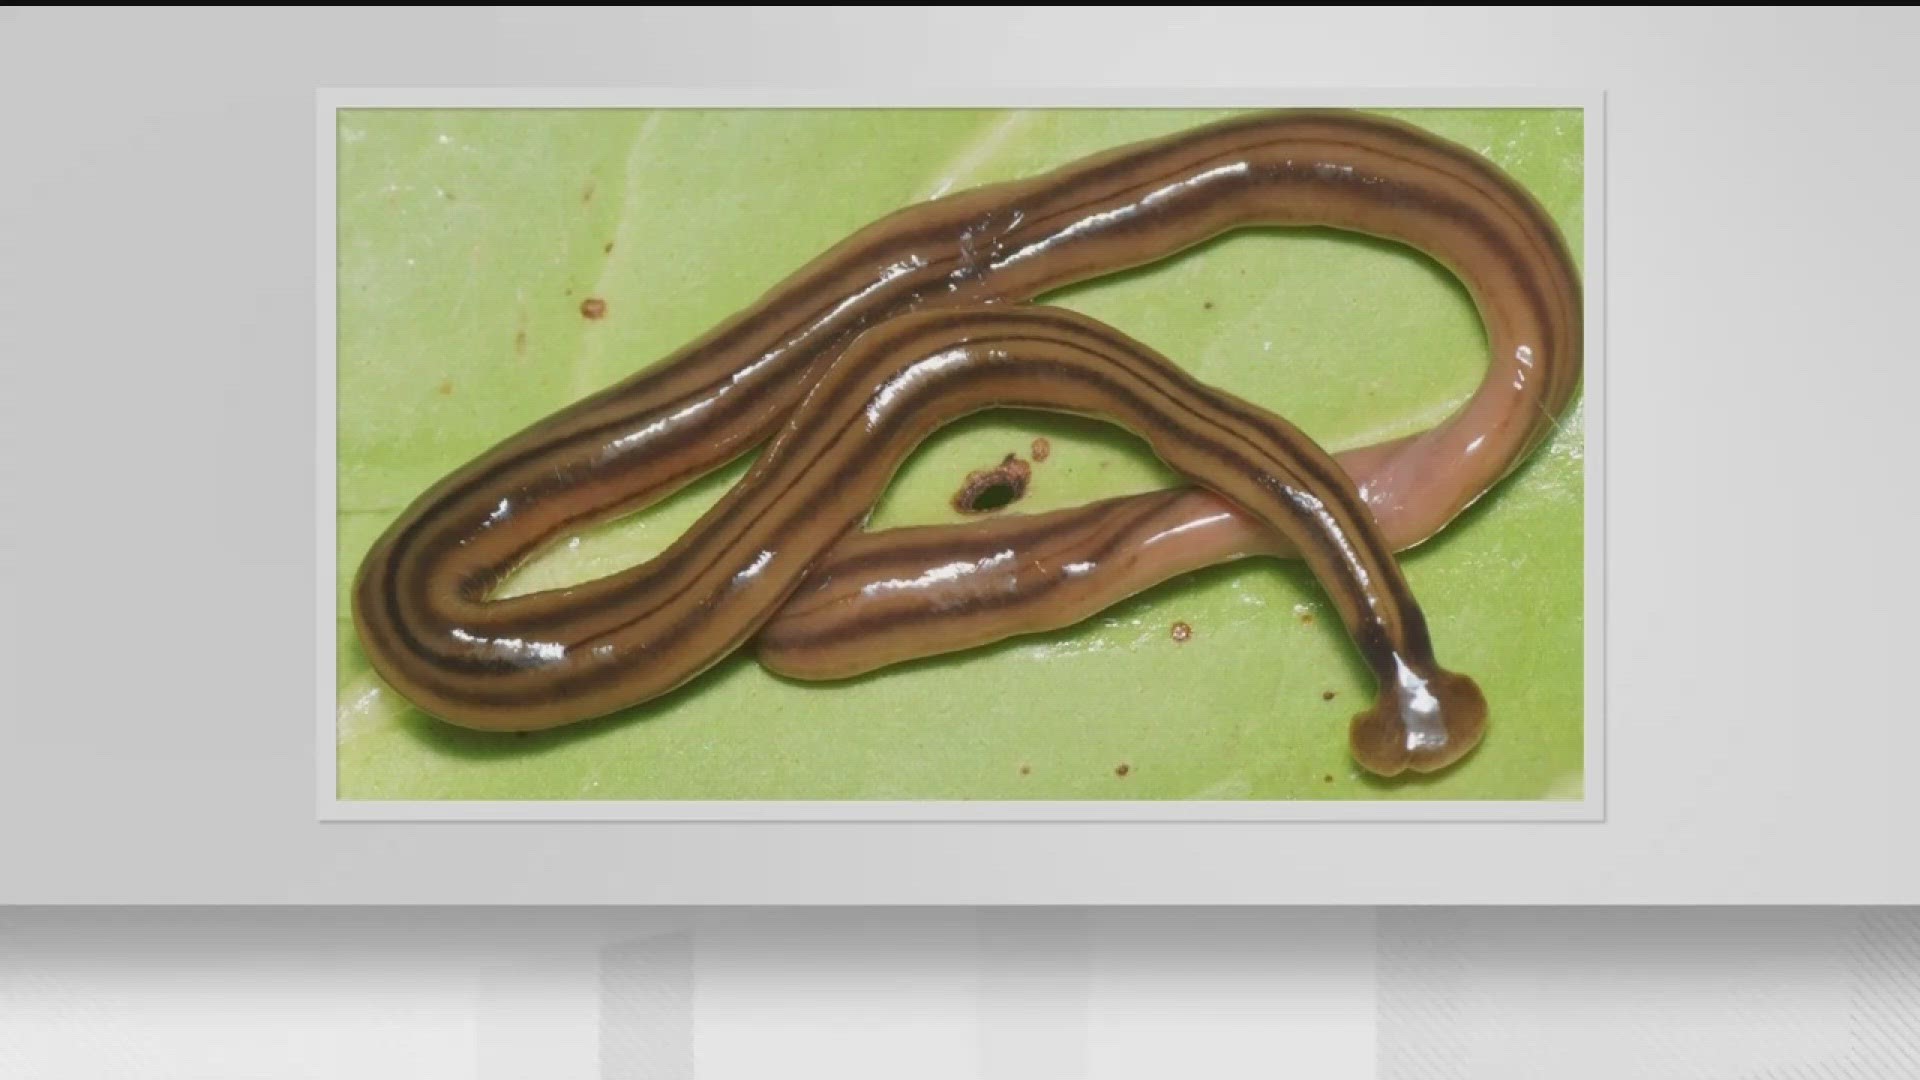 Although they prey on Earth worms, they also eat the invasive Asian jumping worm, which are more prone to eating the Earth worms important for our ecosystem.